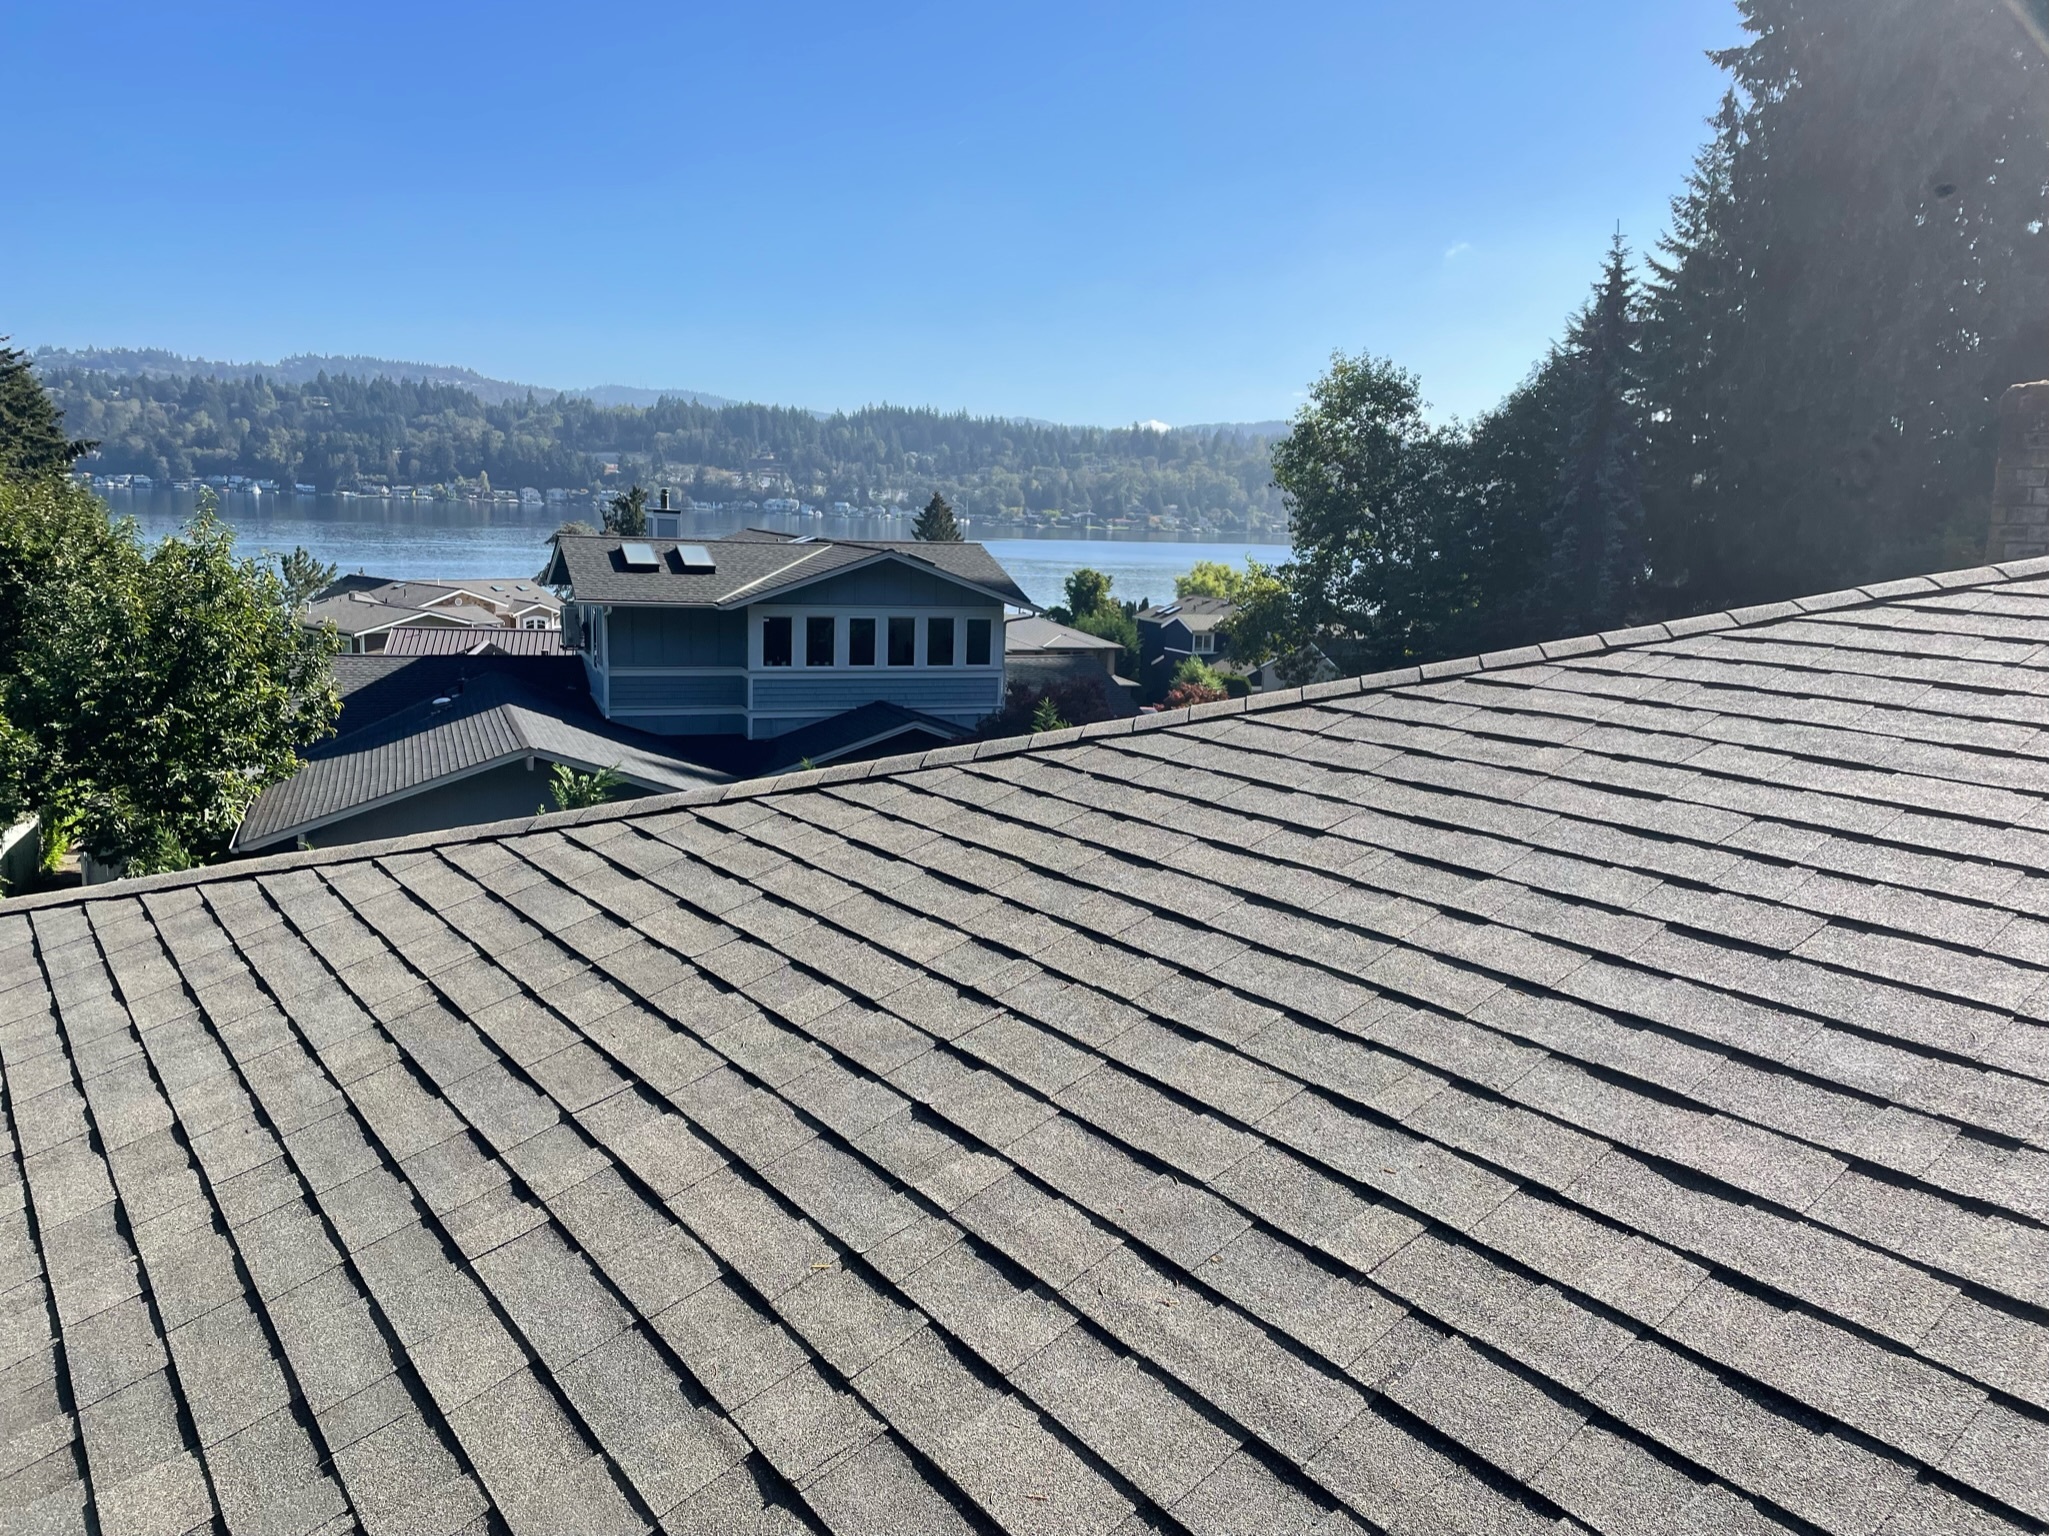 Lynnwood Roofing Company is the #1 Rated Roofing Contractor in Lynnwood